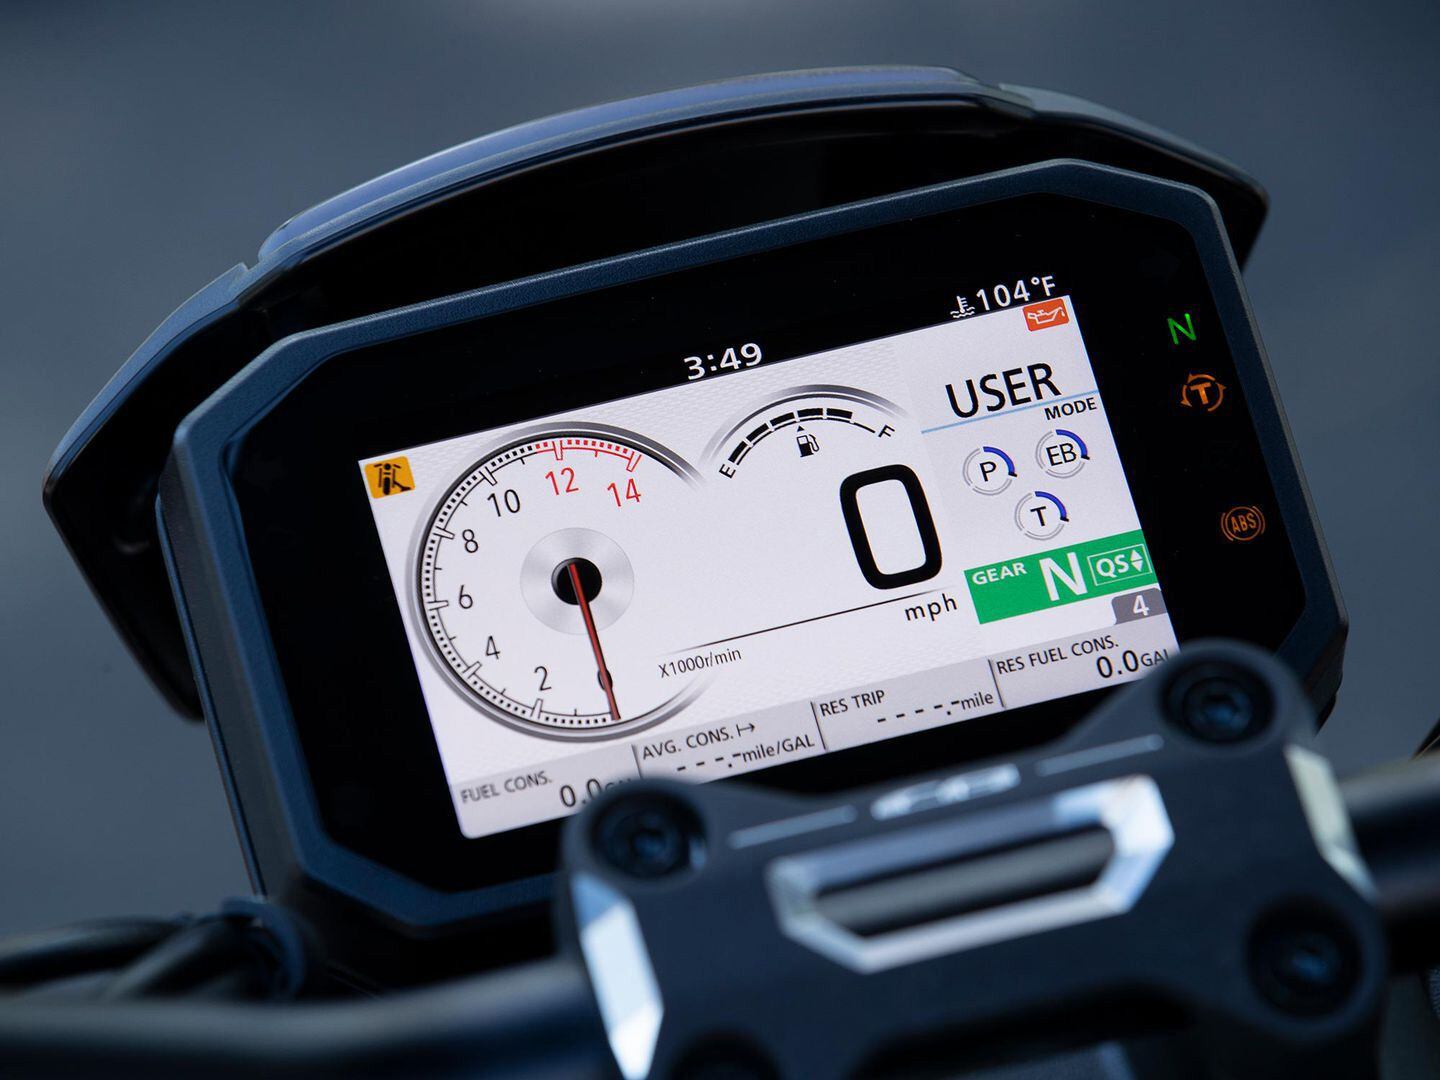 A 5-inch full-color TFT screen offers four types of speed/rpm display as well as fuel gauge/consumption, riding mode selection/engine parameters, and a Shift Up indicator. Management is via buttons on the left handlebar.